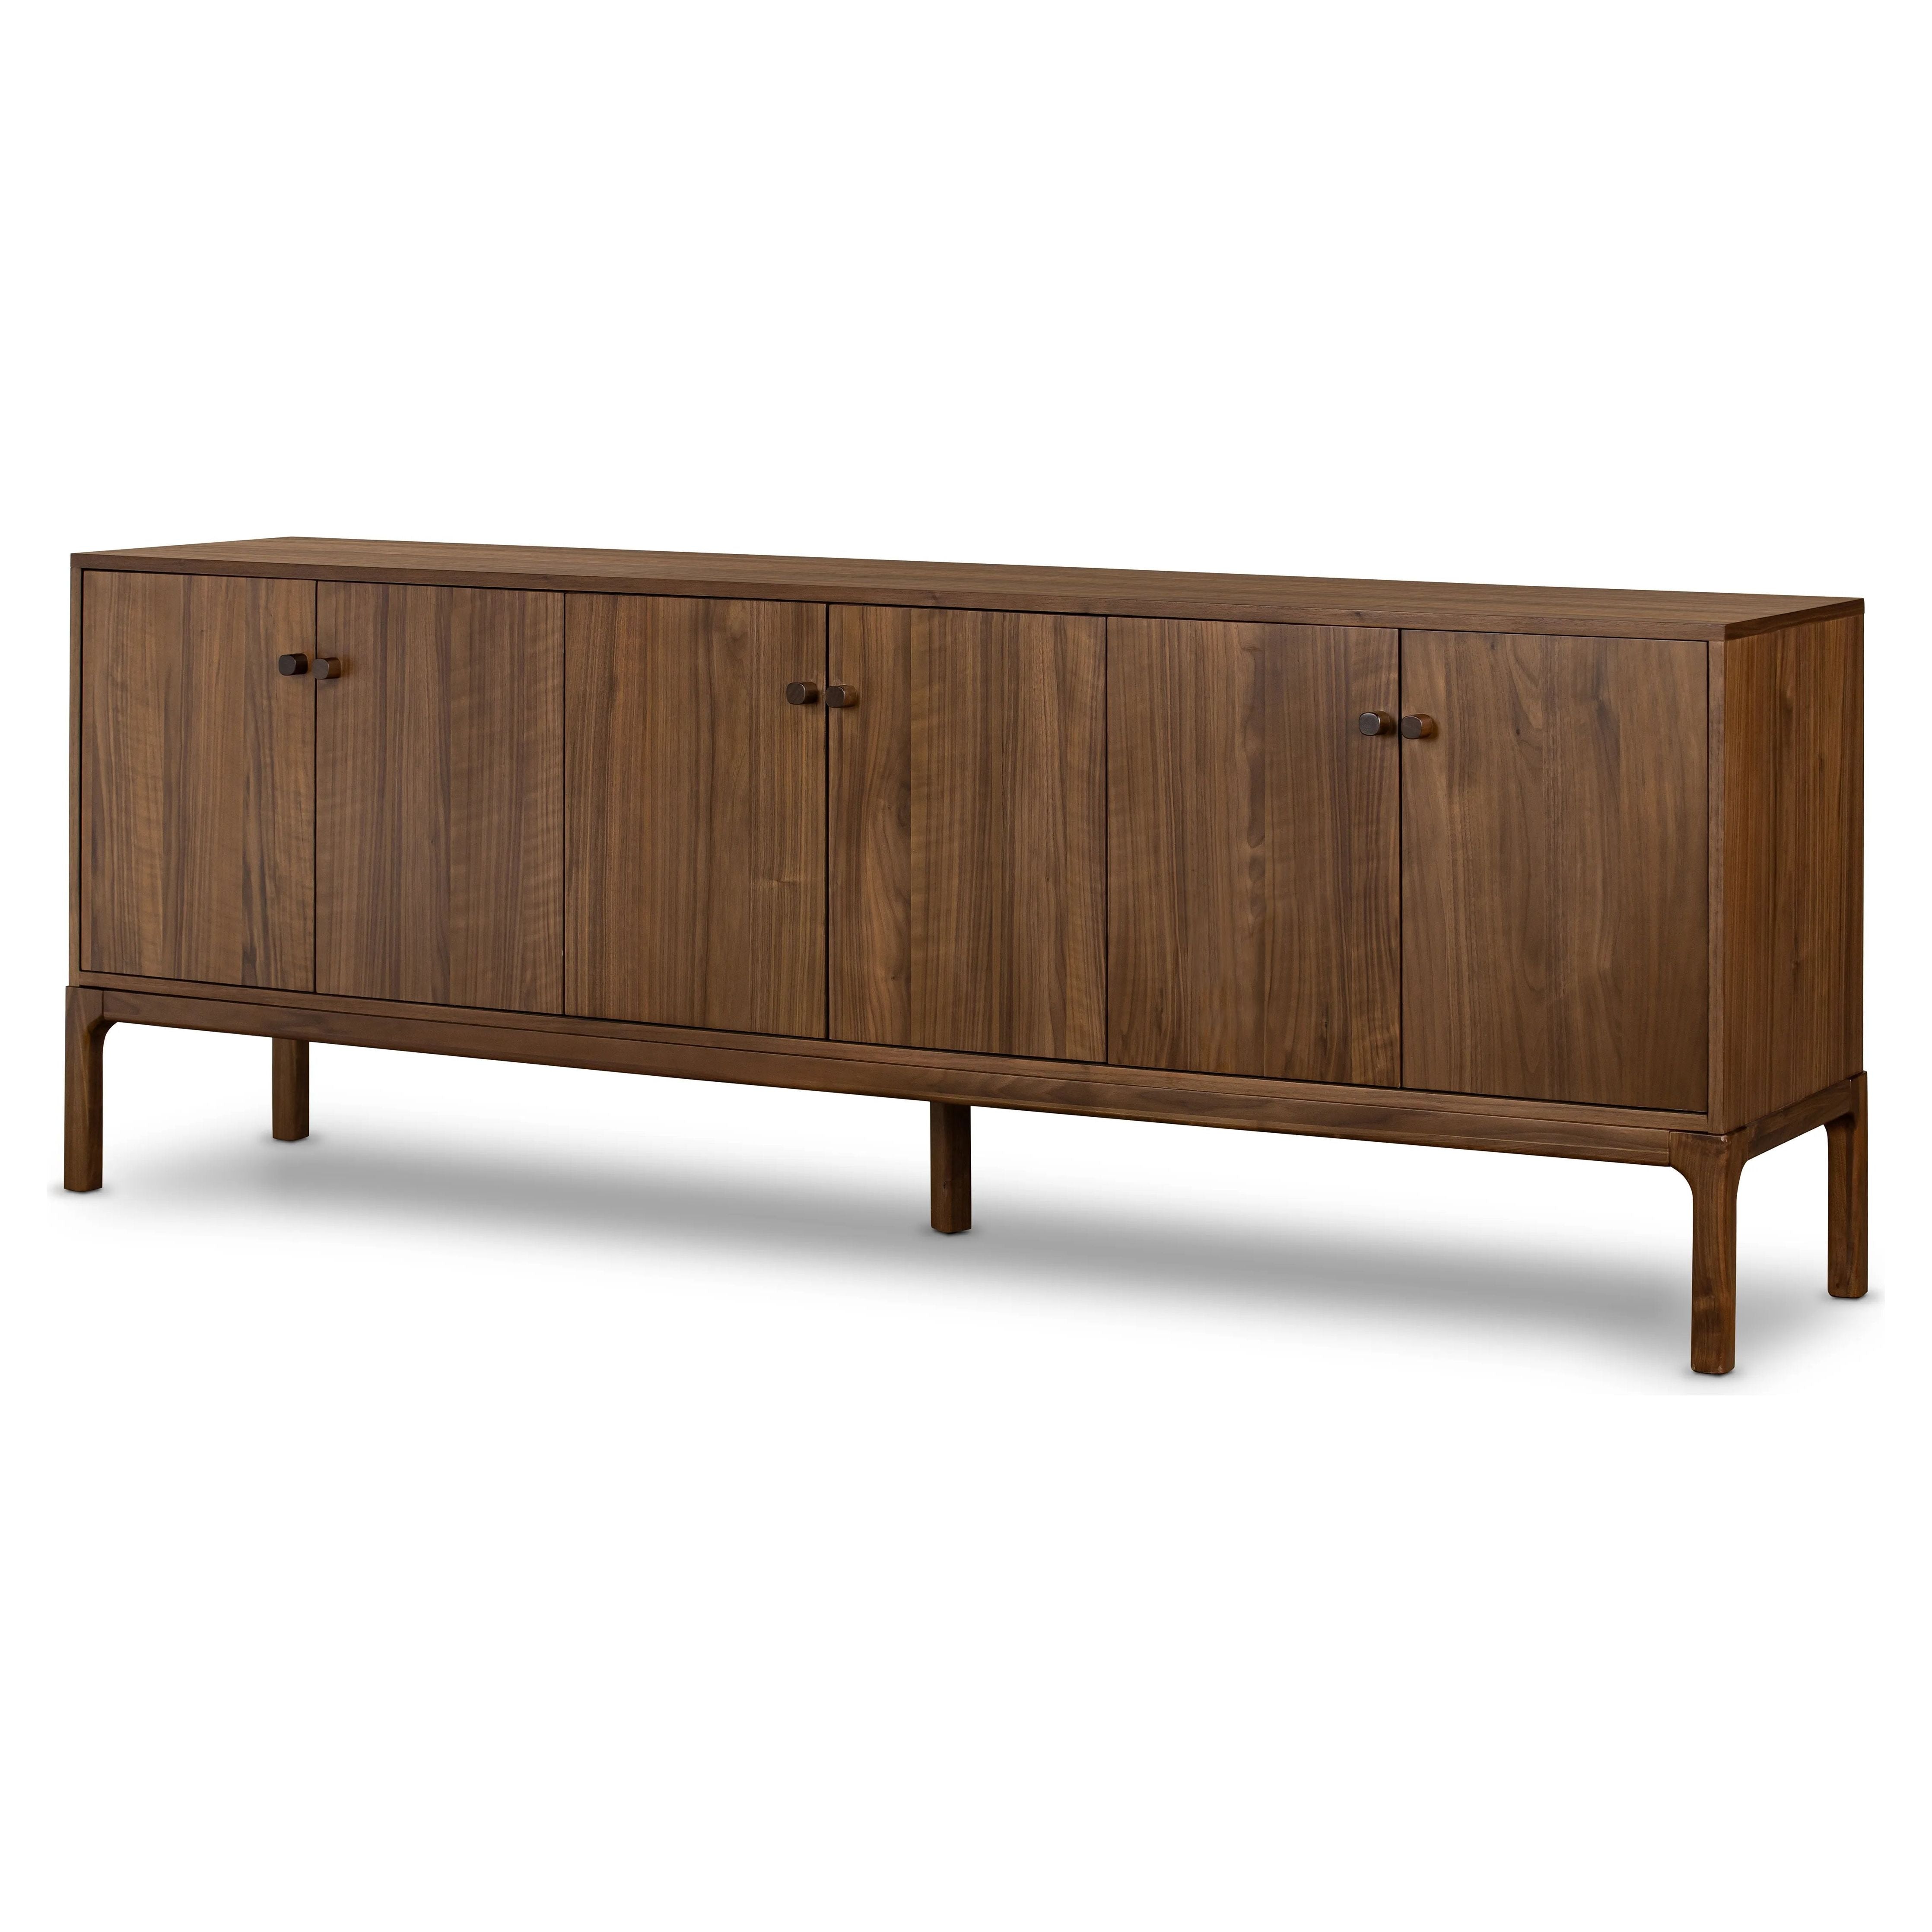 Inspired by campaign-style furniture of the 1800s â€” packable pieces first designed for traveling military use â€” a simply shaped sideboard of natural walnut features a subtly inset top and rounded legs, finished with wooden hardware Amethyst Home provides interior design, new home construction design consulting, vintage area rugs, and lighting in the Washington metro area.